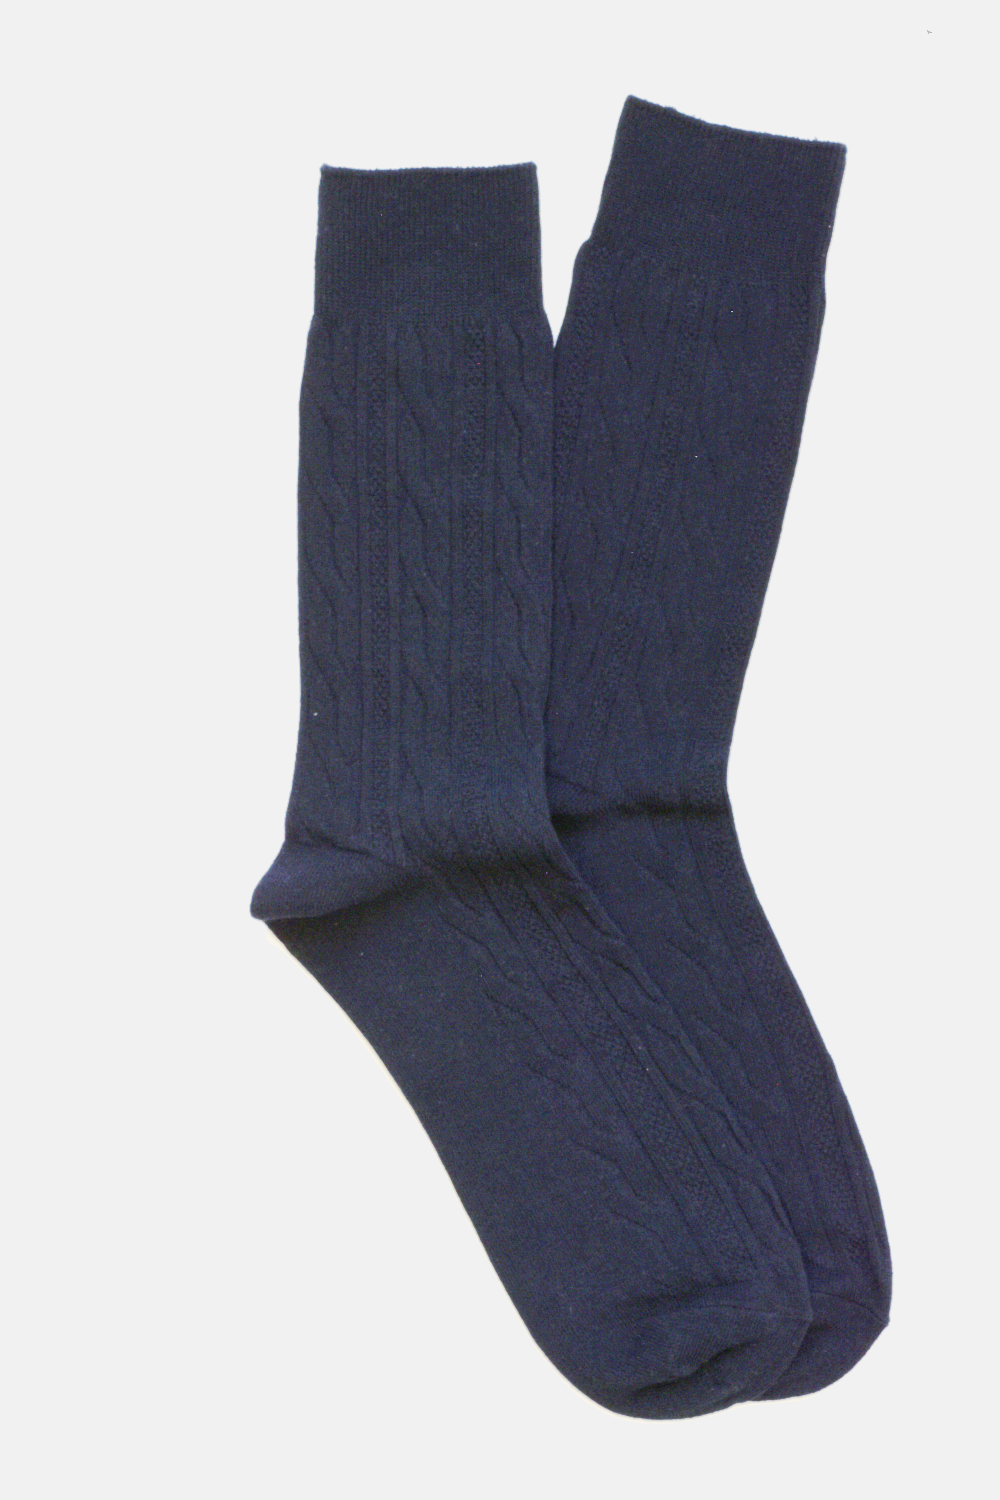 Curated Basics Navy Cable Knit Socks Kempt Athens Mens Clothing Store